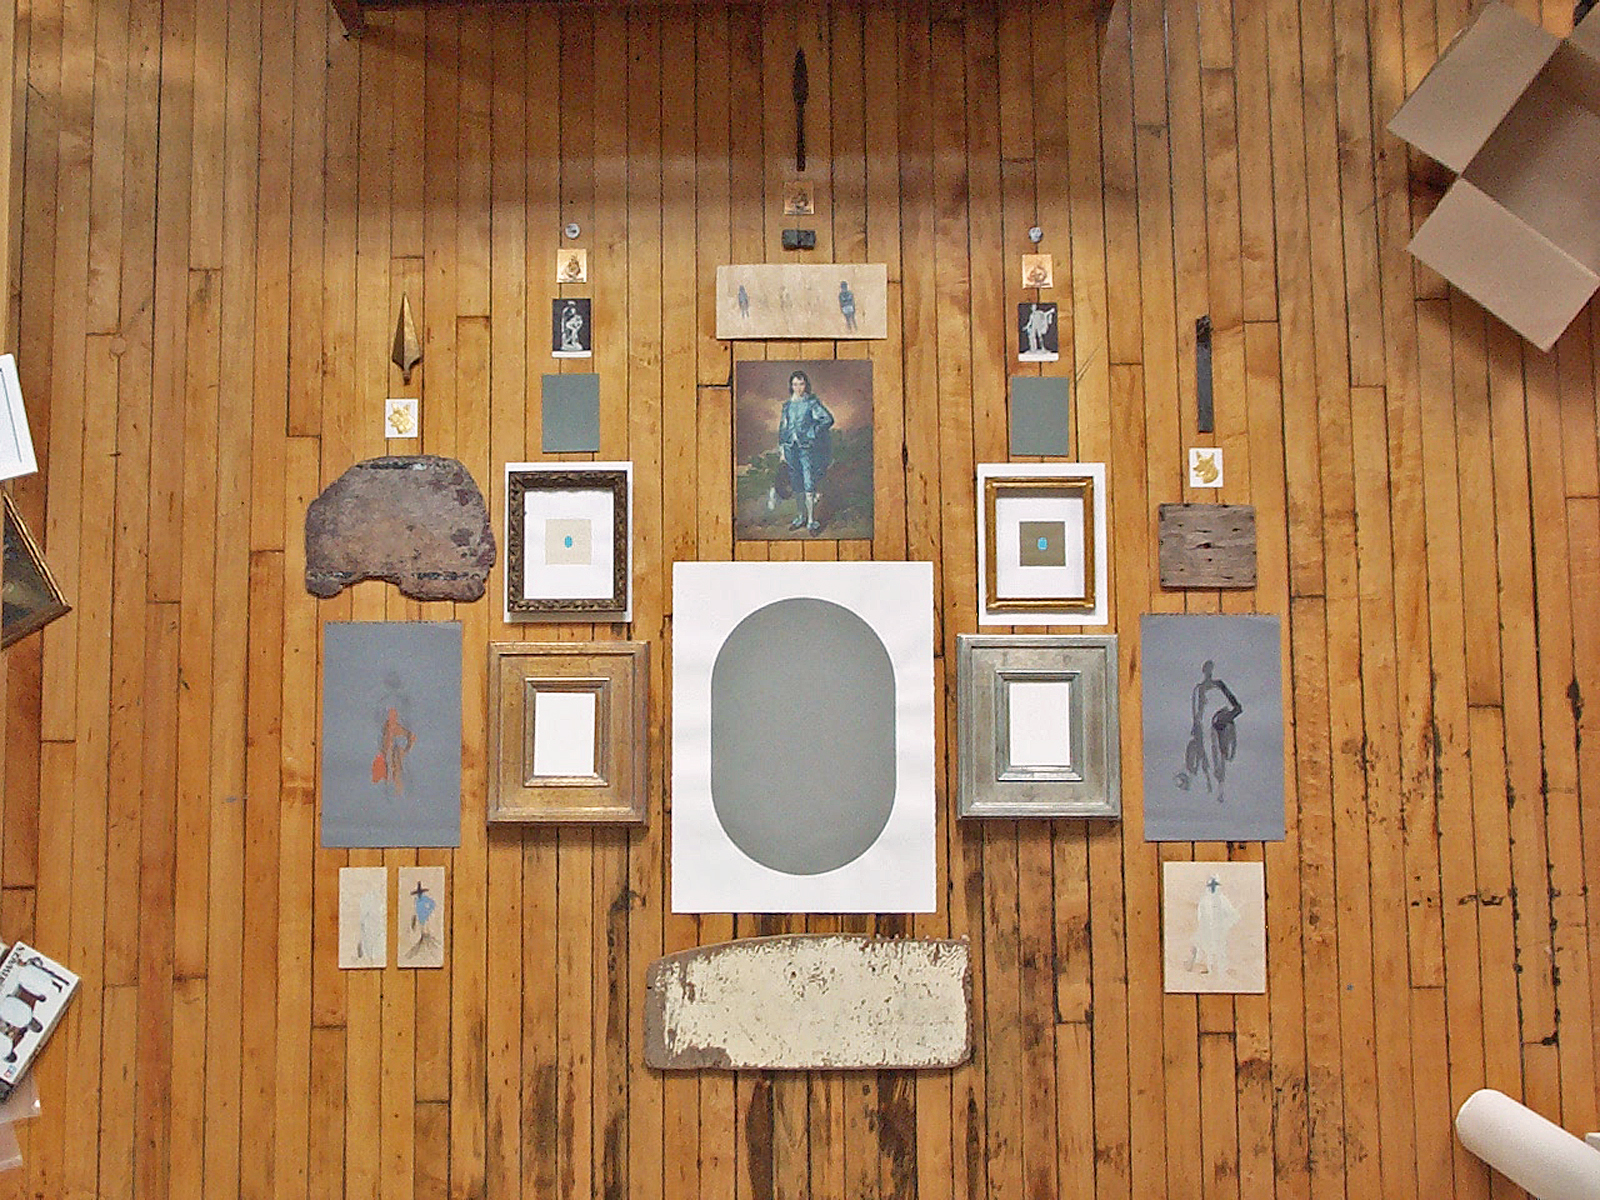 View from above of paintings, drawings and objects arranged on a wood floor.